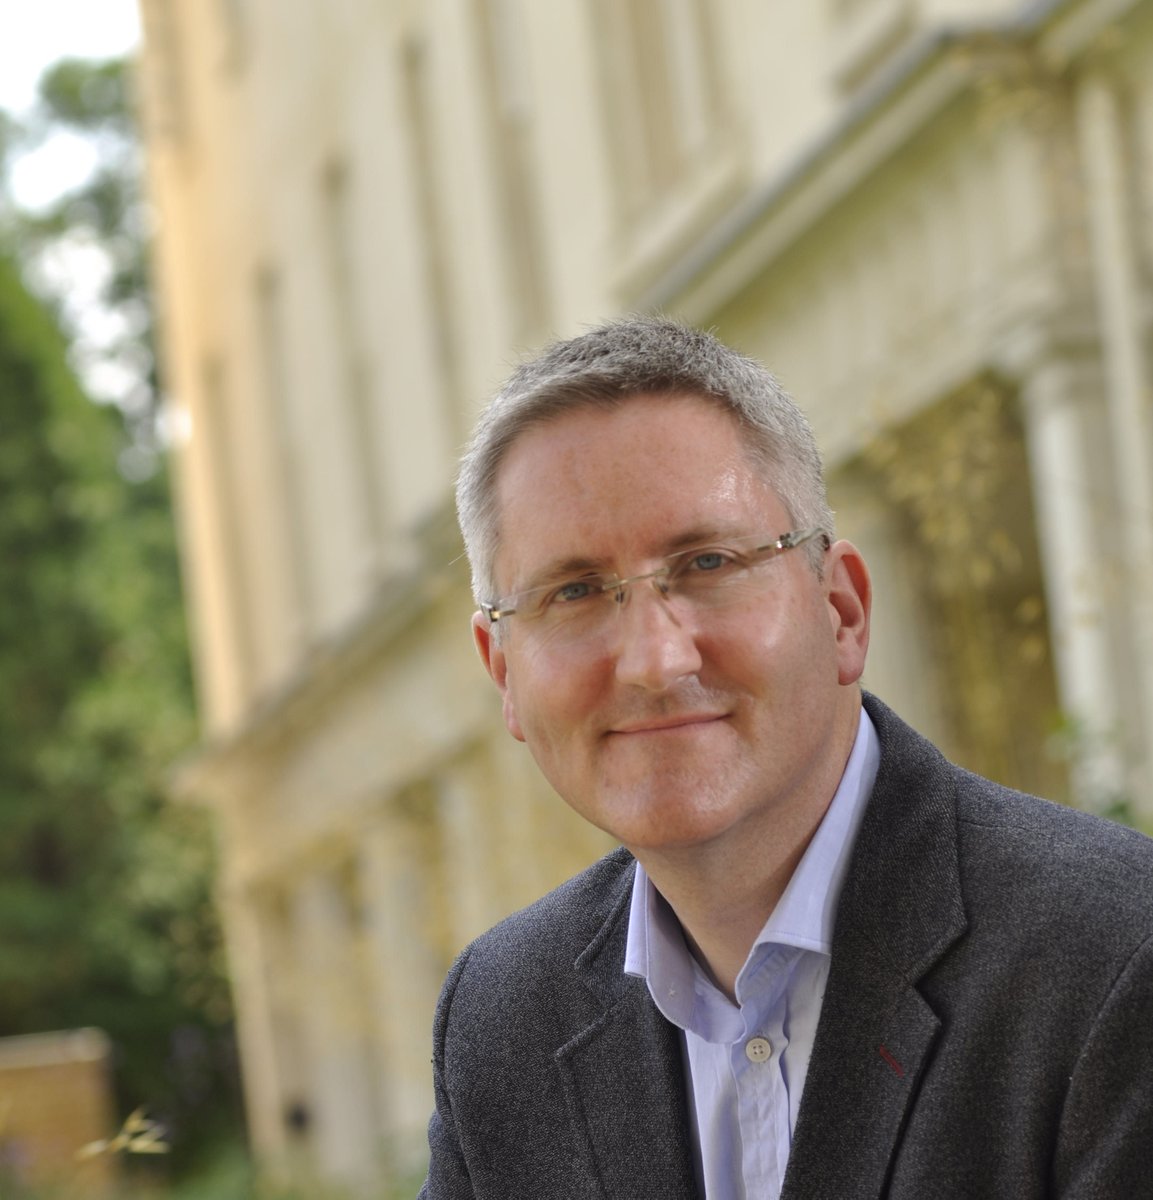 We're delighted to announce @GrahamVirgo has been elected as next #DowningCollege Master, taking office on 1 Oct 2023. 'After nearly 40 years here, 1st as an undergraduate & later as a fellow, I know the transformative effect Downing has on its students.” bit.ly/Dow19thMaster